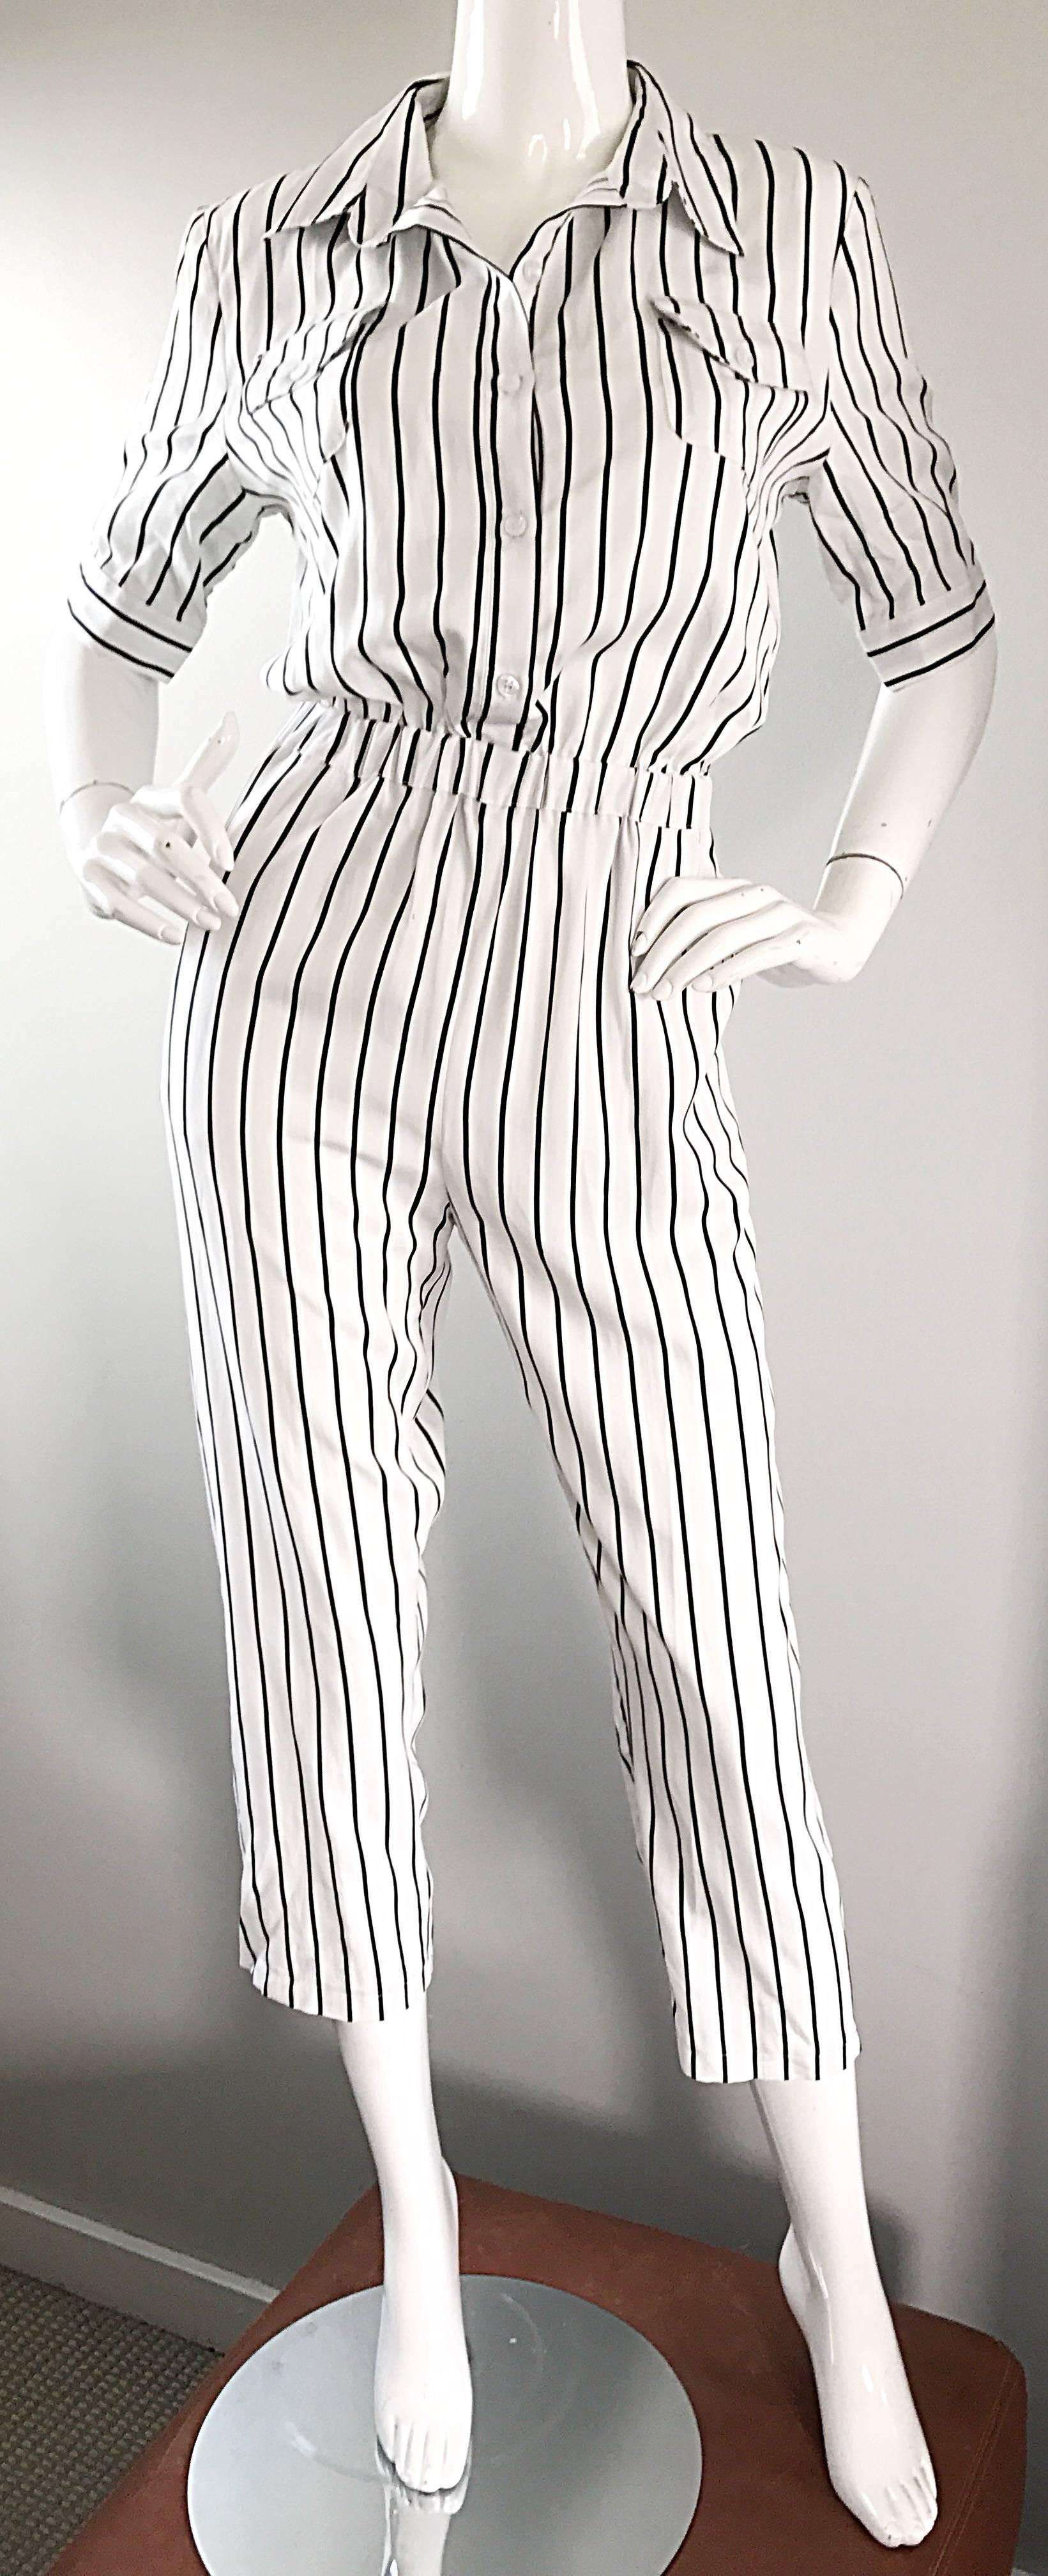 Women's Rare Prada 1990s Mickey Mouse and Minnie Mouse Black and White Striped Jumpsuit